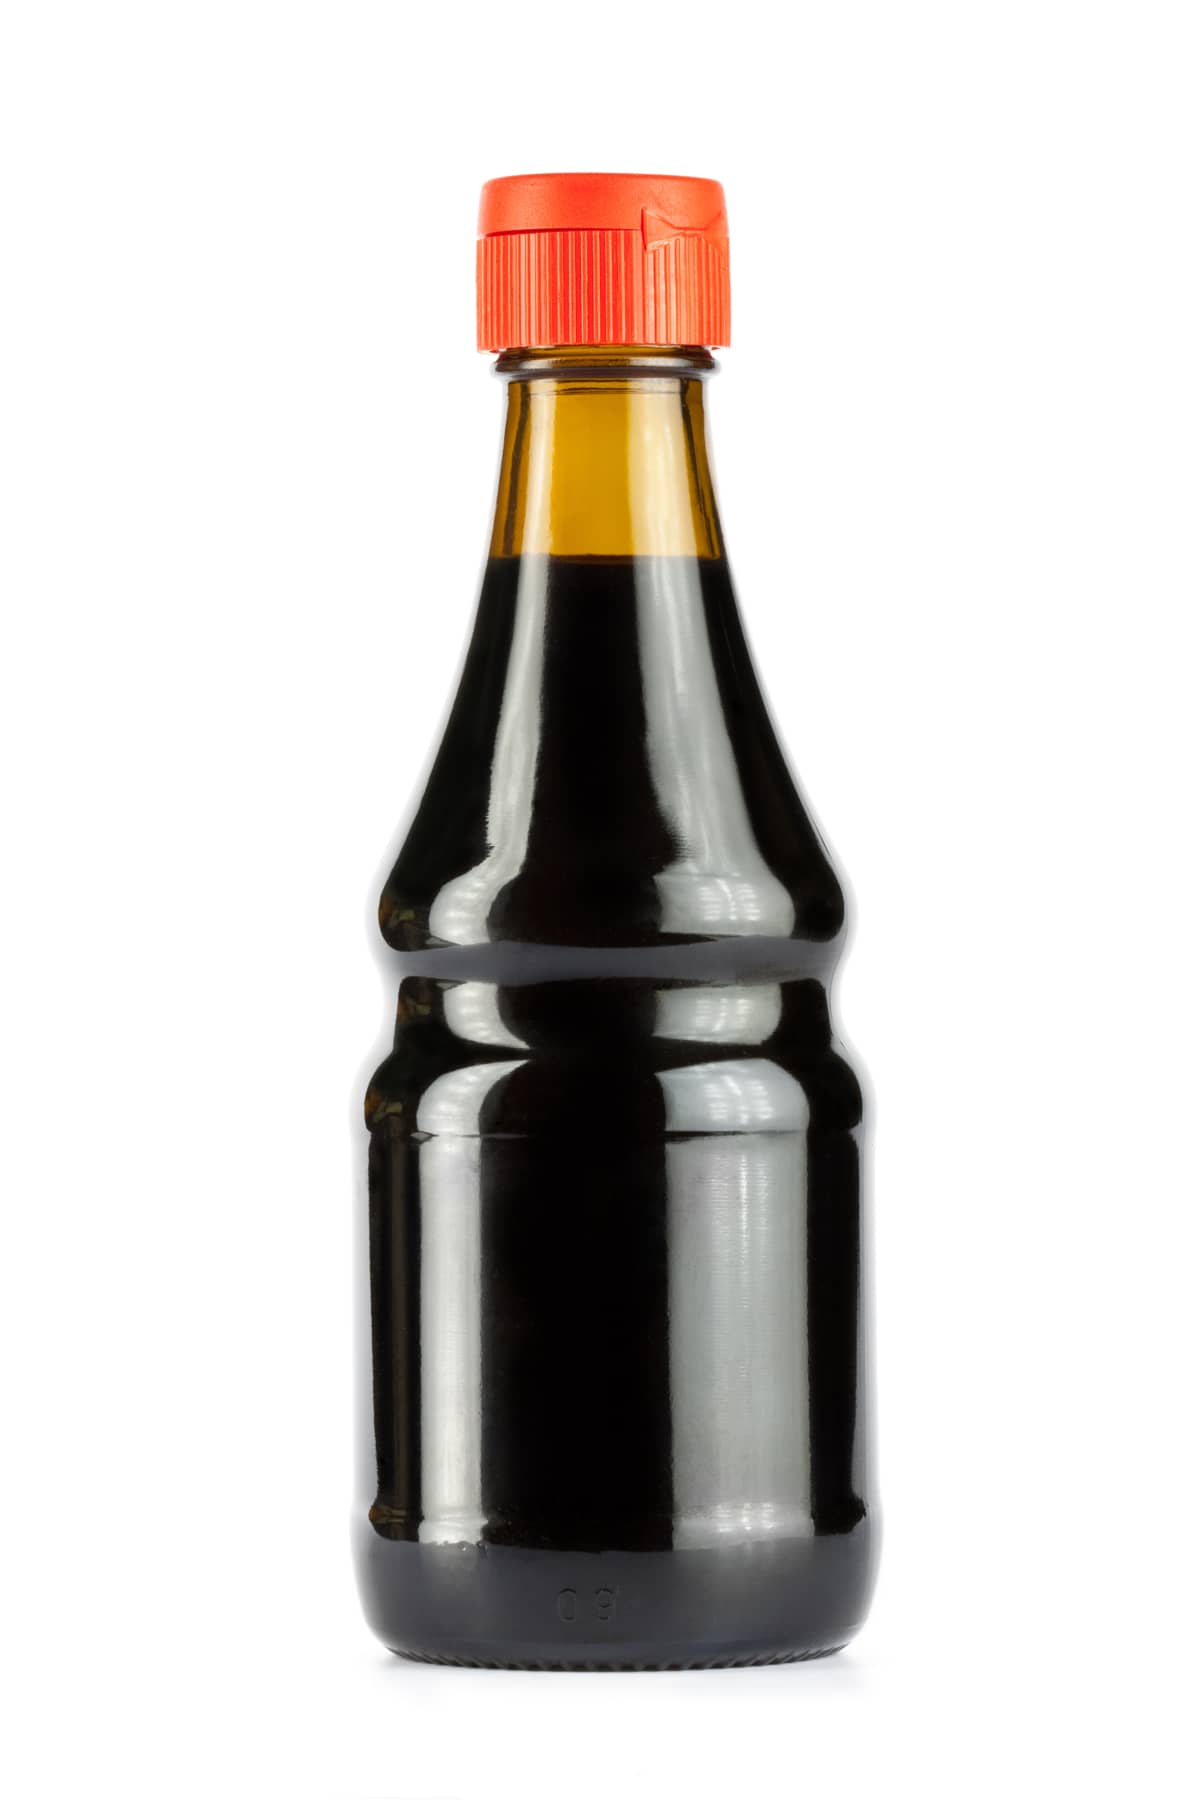 A bottle of Soy Sauce isolated on a white background.